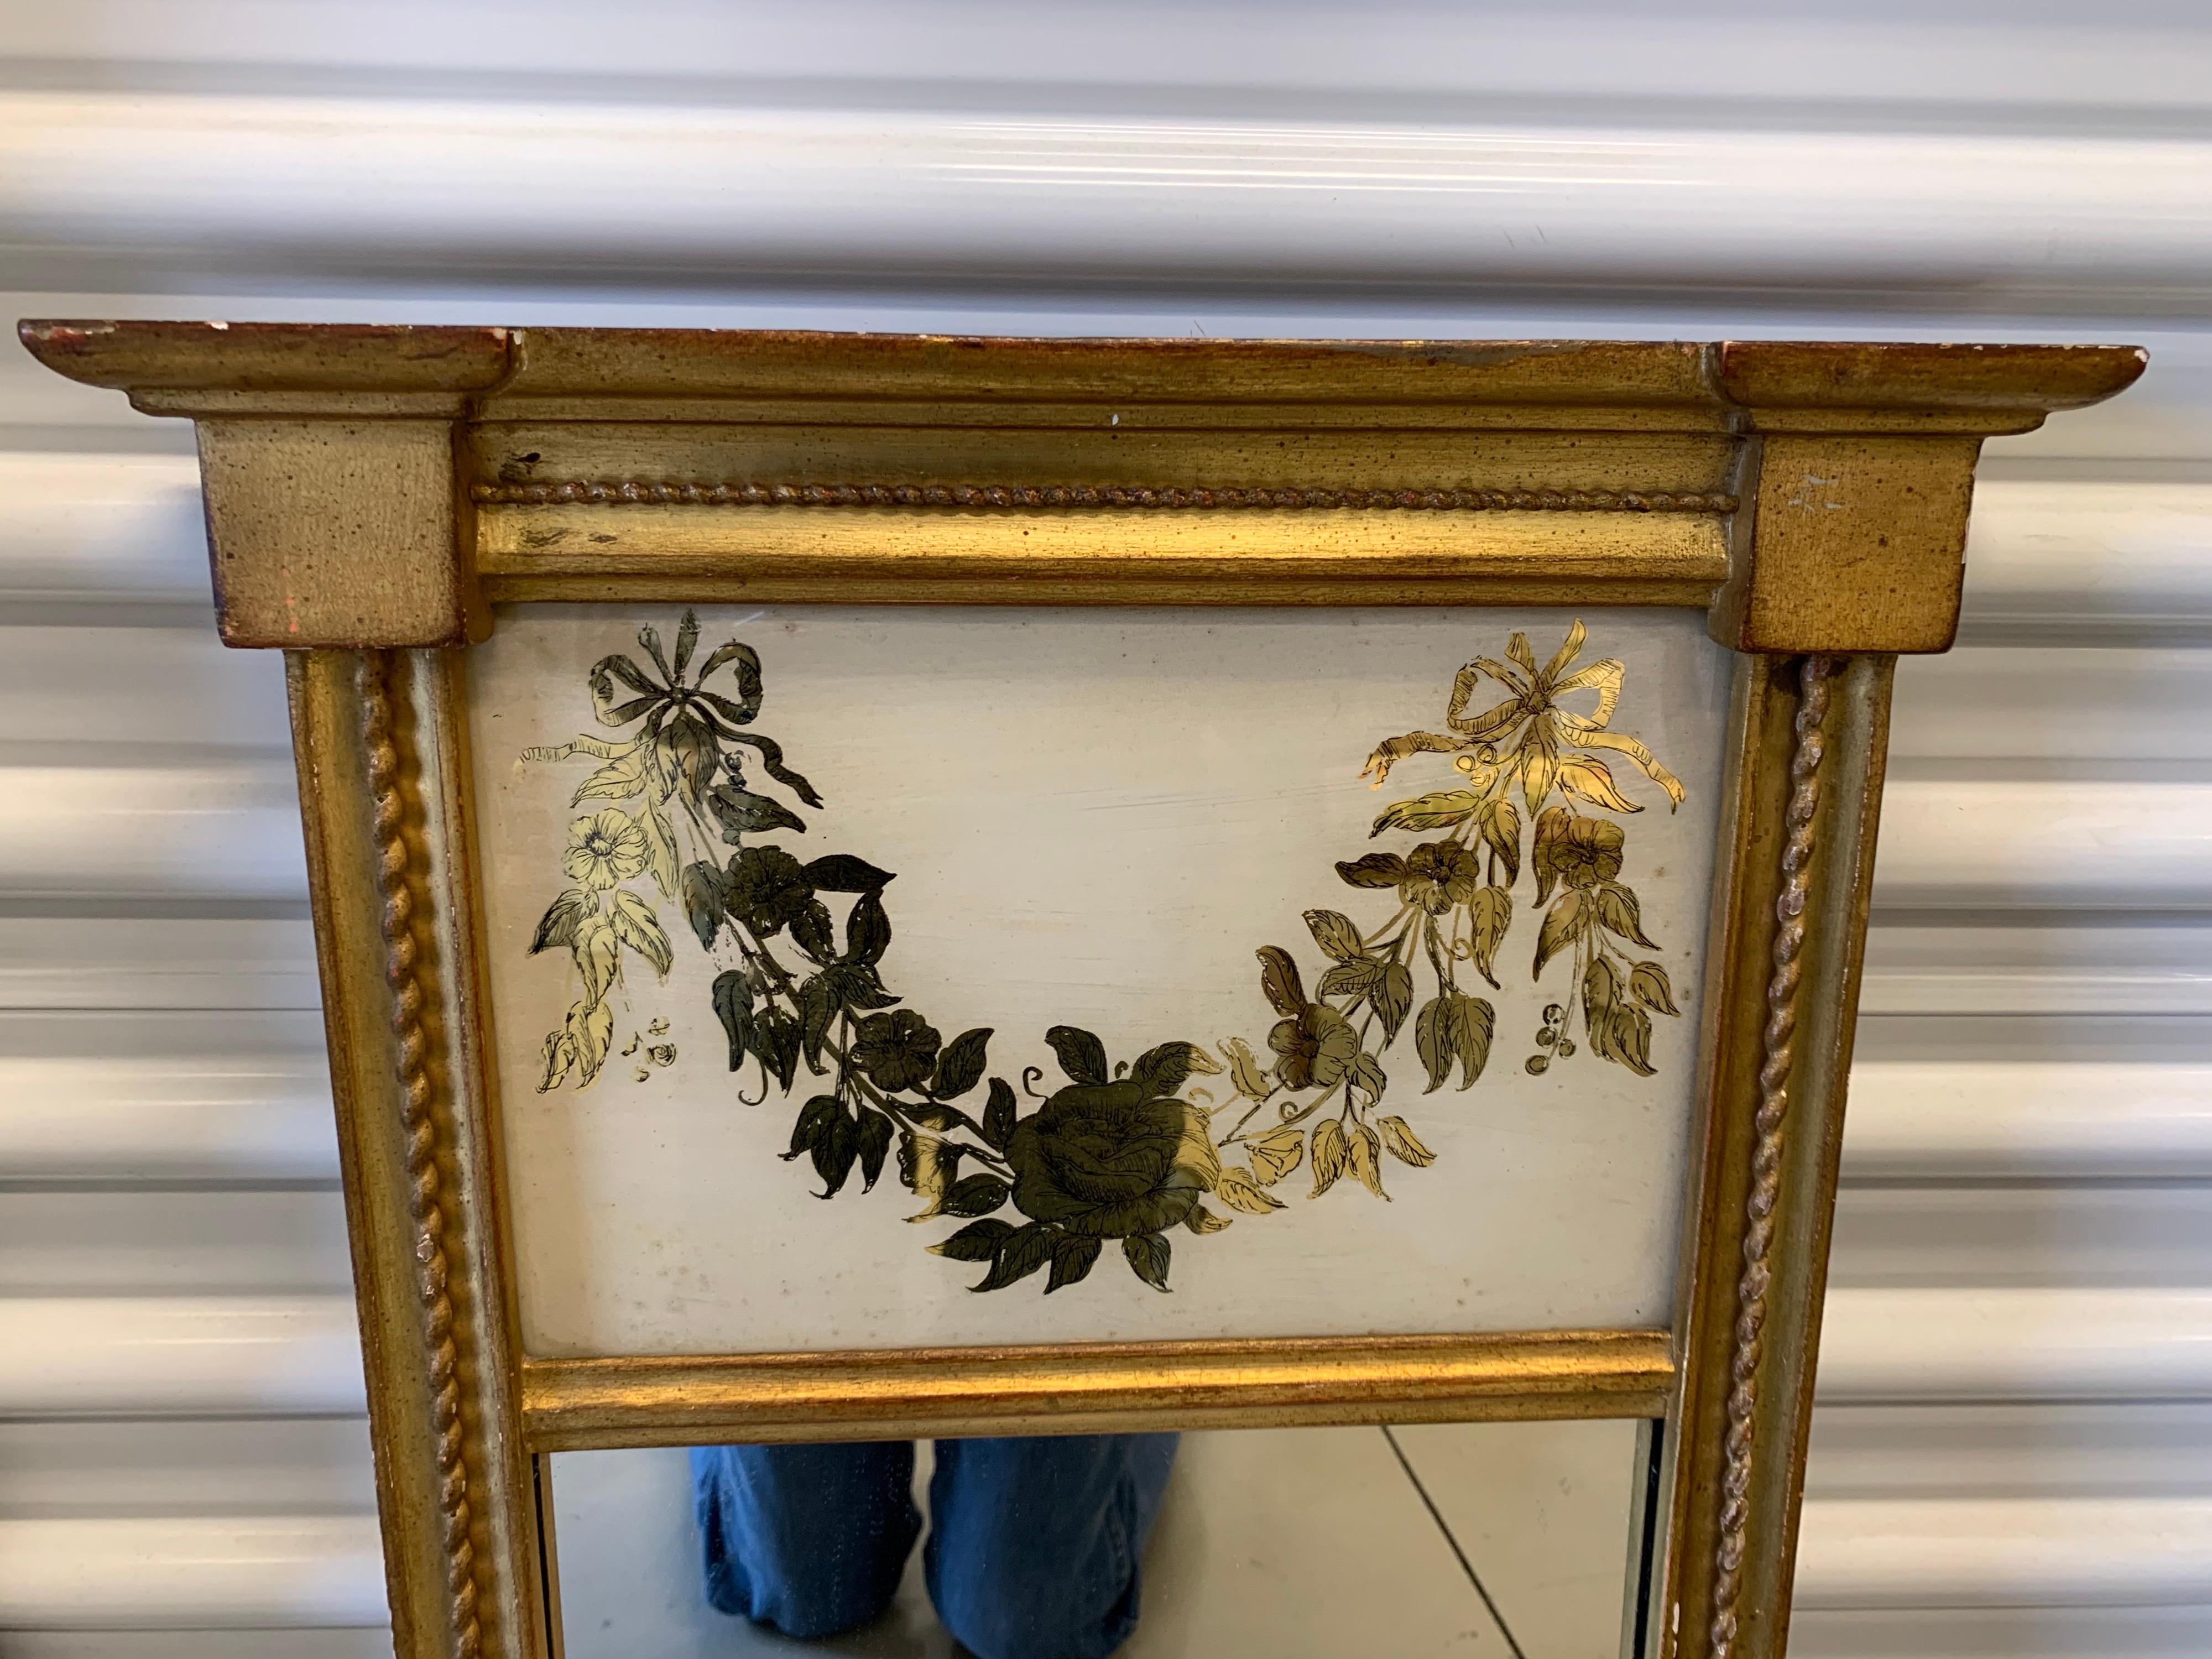 Great scale on this giltwood antique Trumeau mirror with etched gold floral motif above mirror.
Perfect for parlor, bathroom or study in your home.